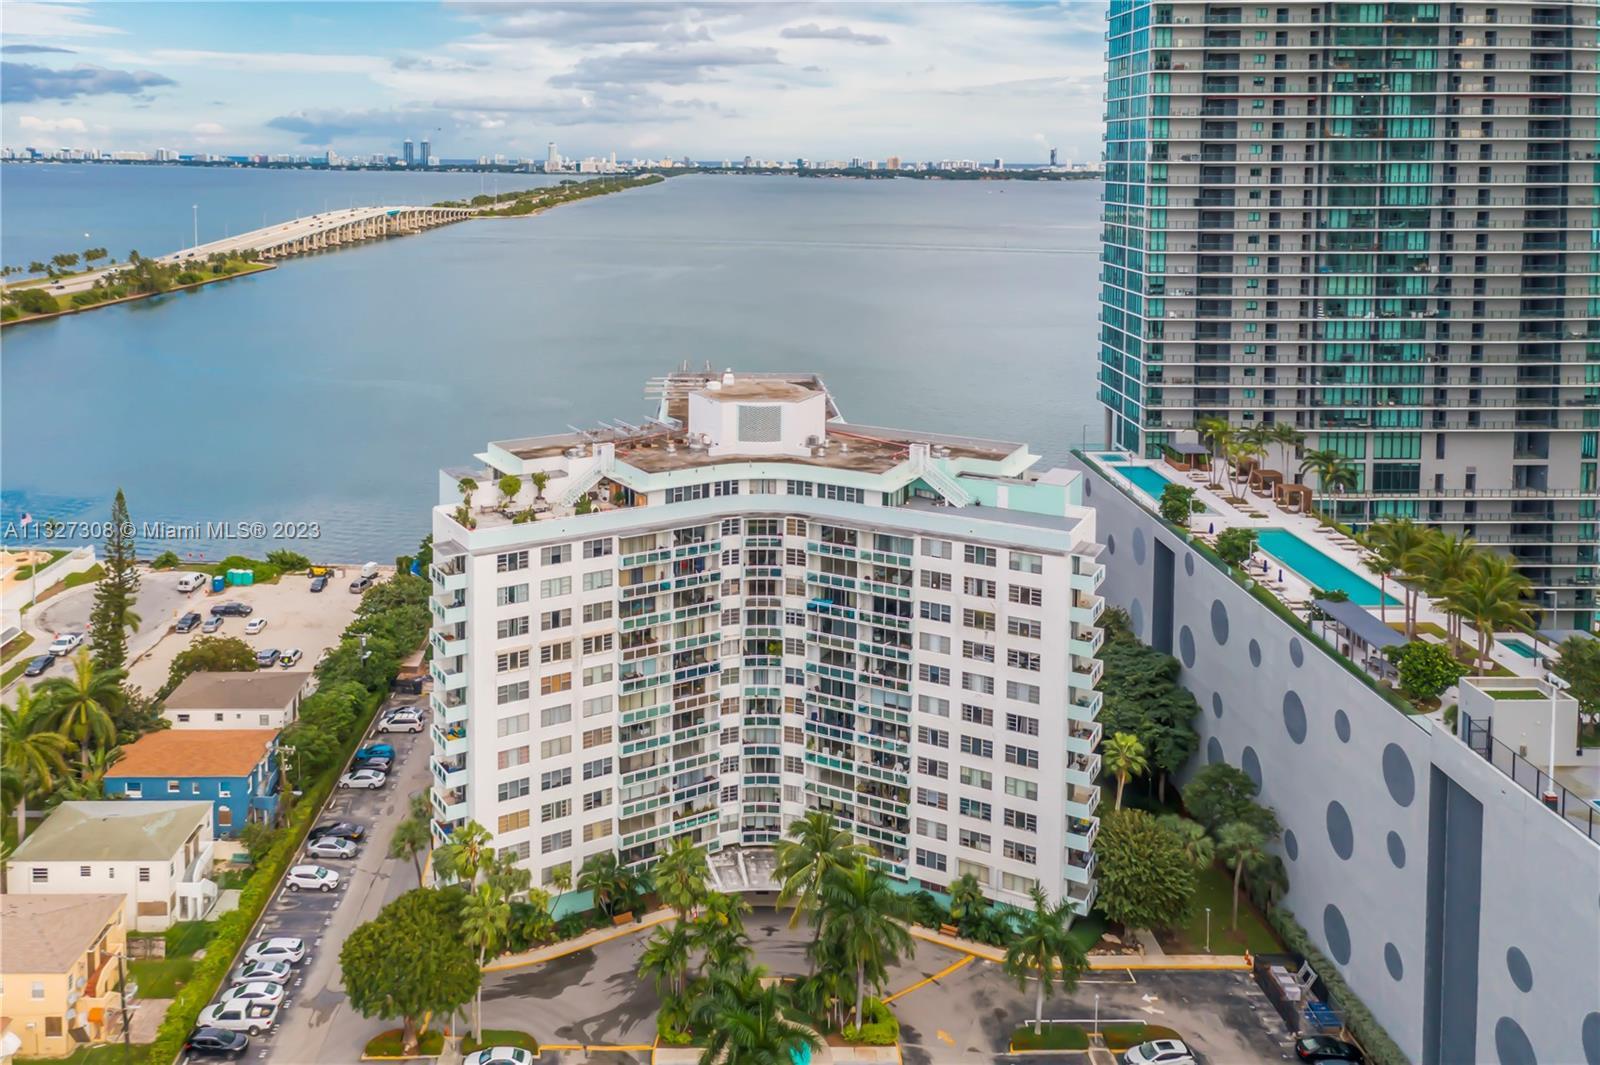 Amazing Biscayne Bay views. Building has great amenities: headed pool, tennis court, exercise rooms,